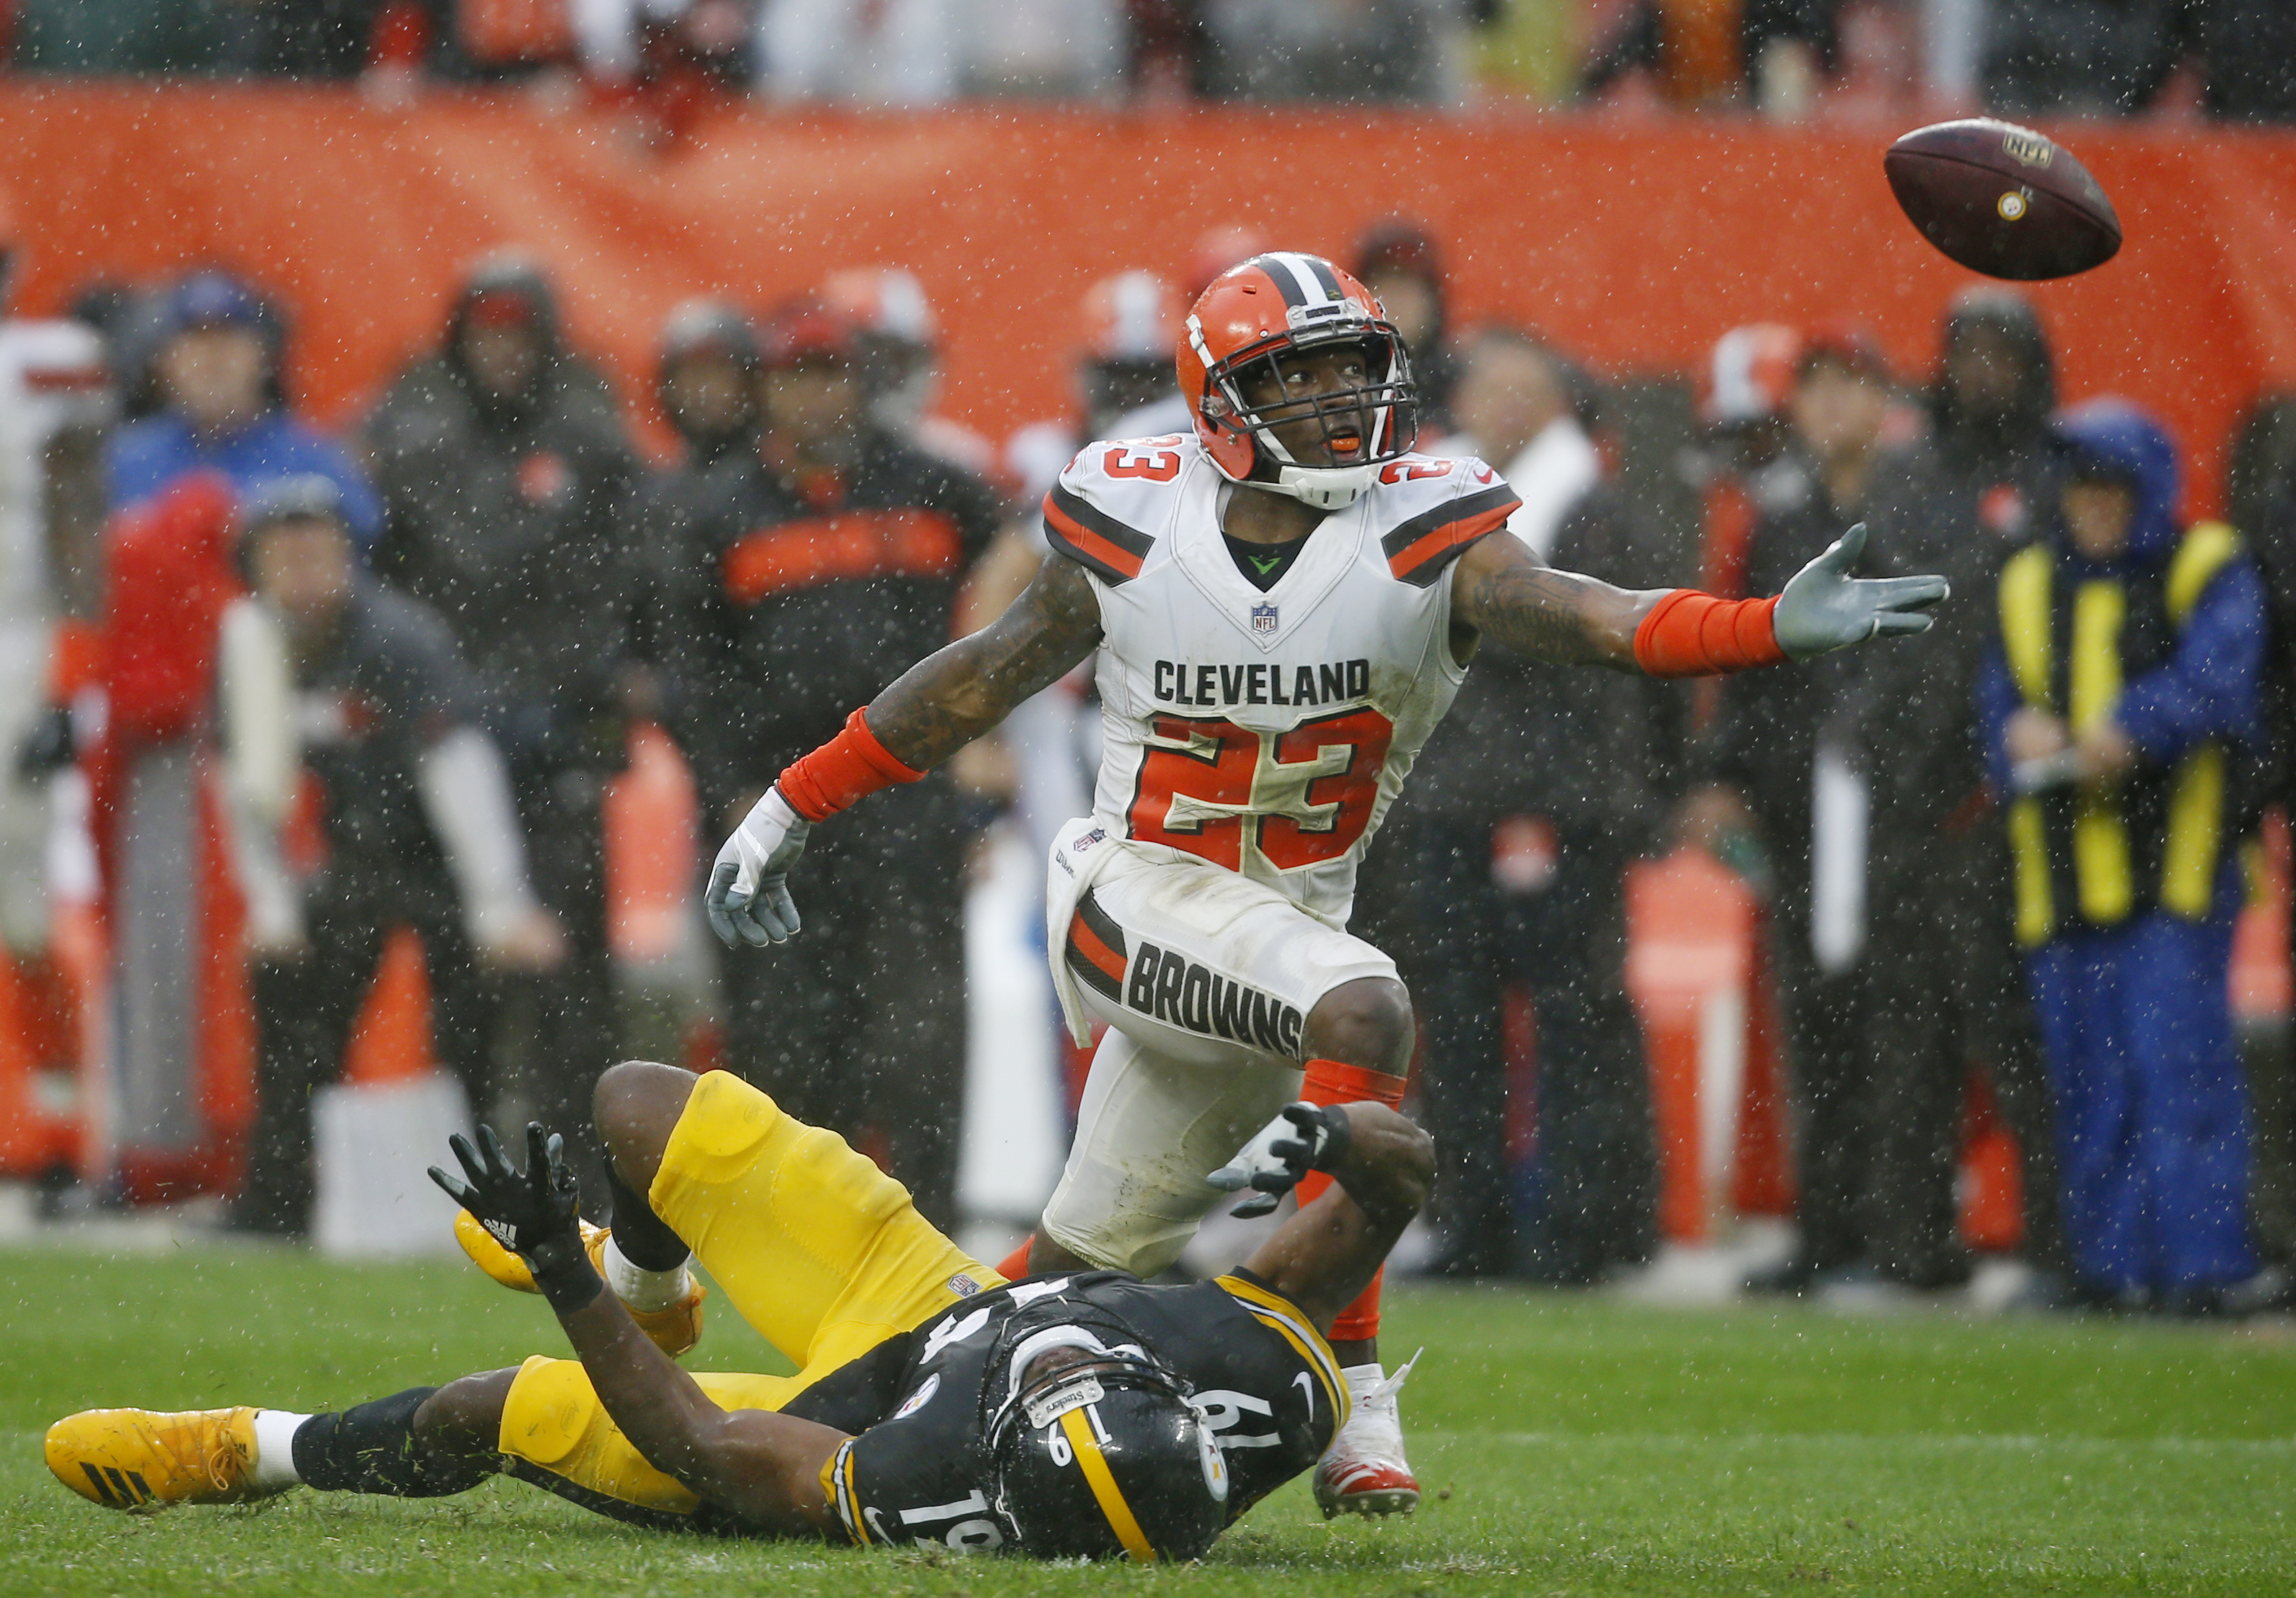 Well, the Browns didn’t lose, tying Steelers 21-21